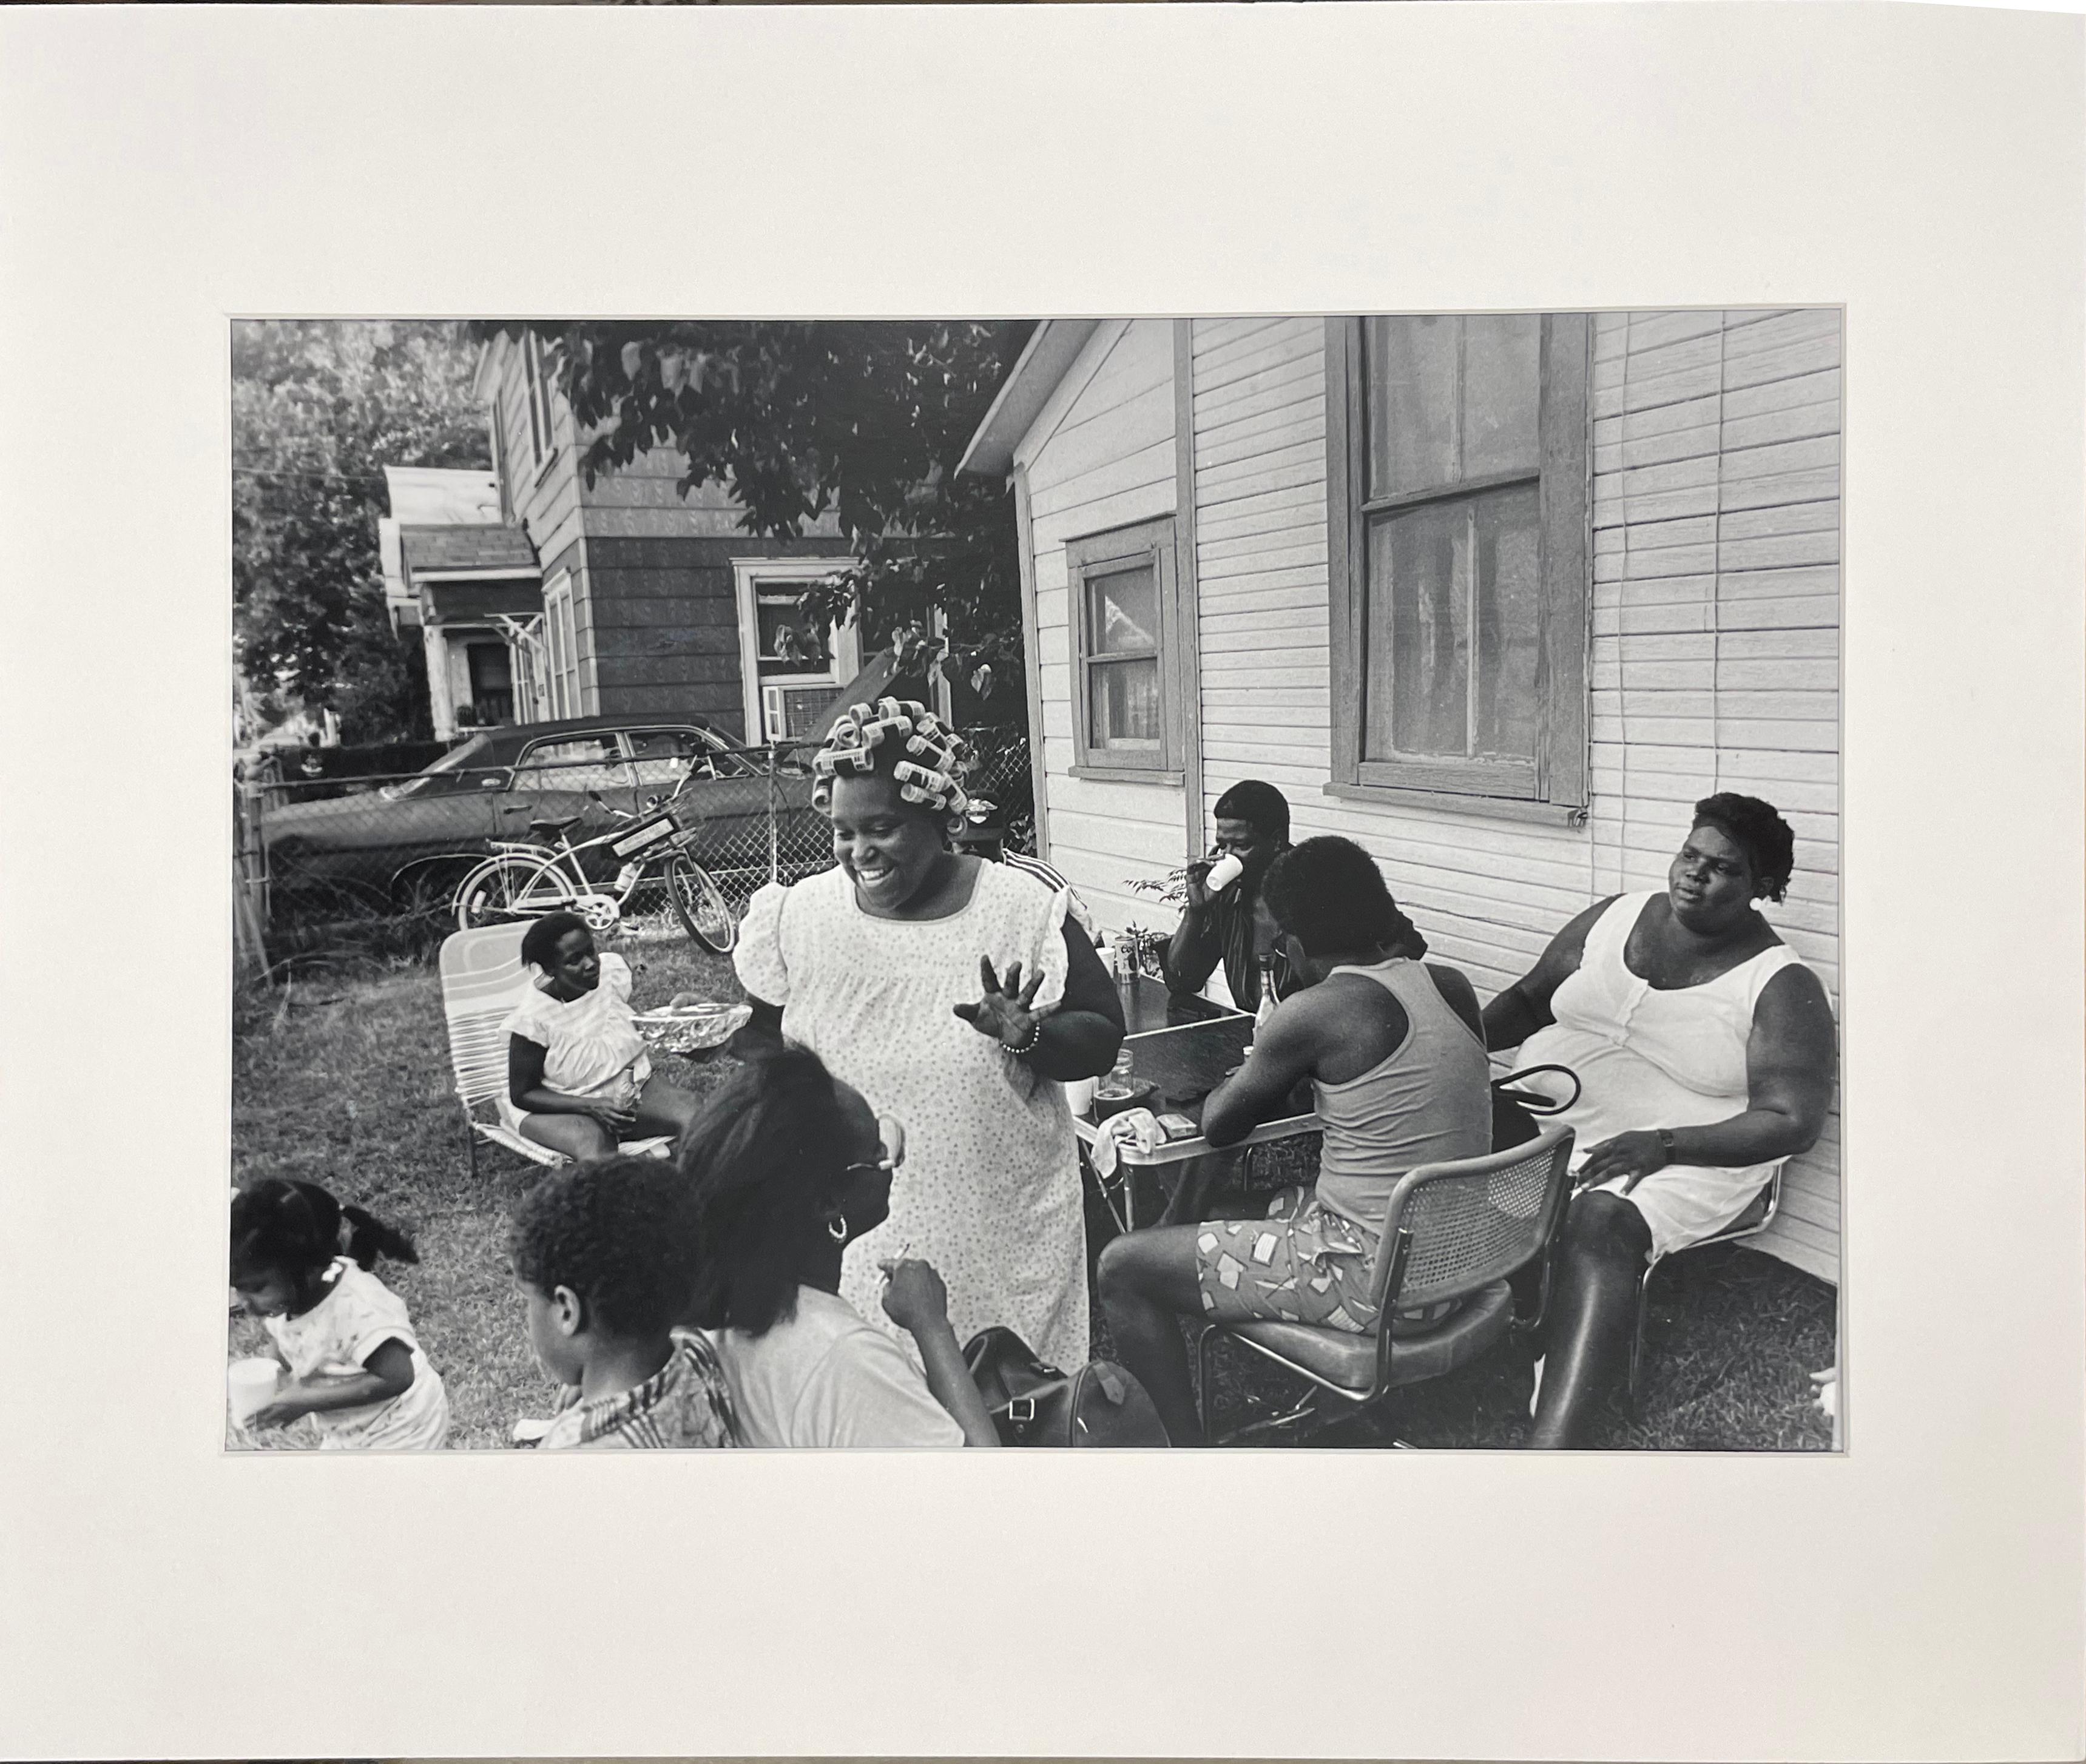 June 19th by Earlie Hudnall, Jr., is a black and white photograph documenting a family's celebration of Juneteenth, the day in which the last of the enslaved people in Texas were told of their freedom through the Emancipation Proclamation. 
This